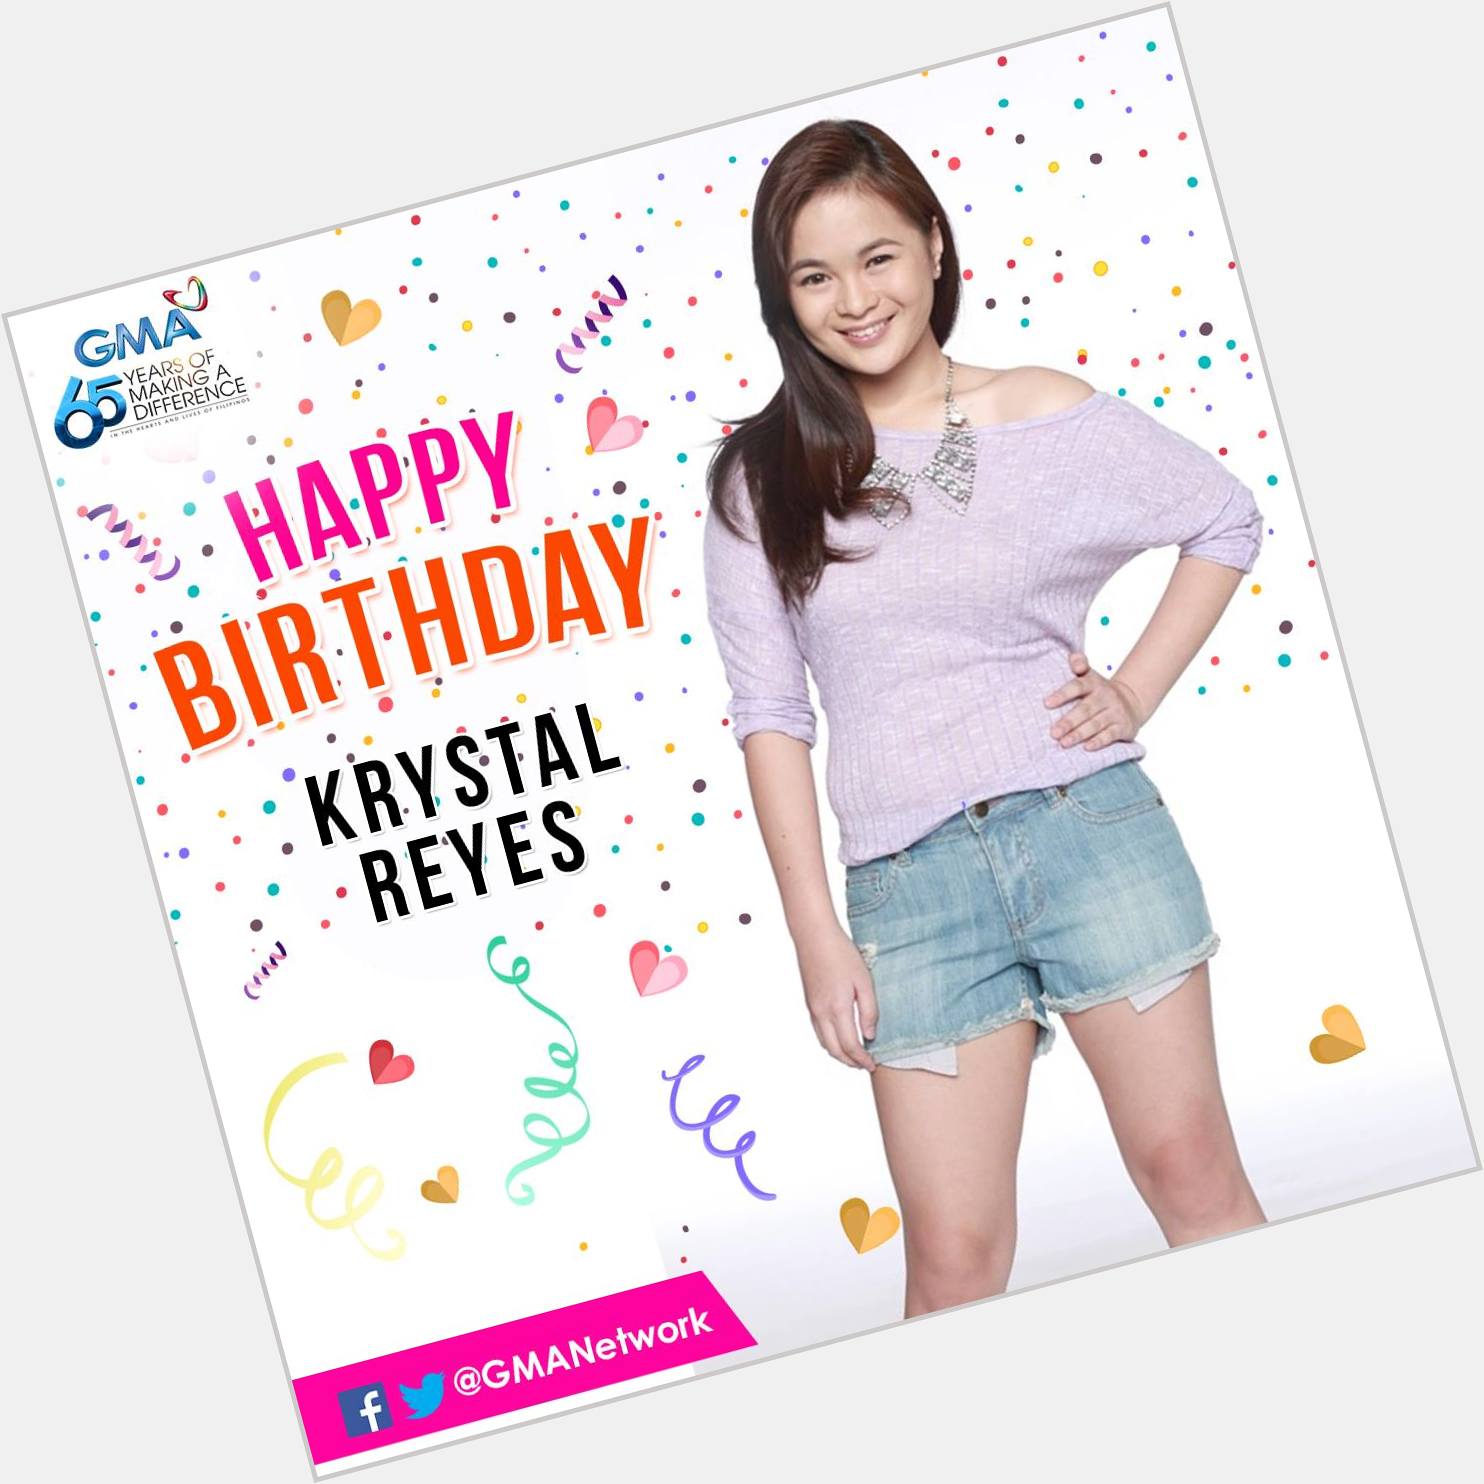 Happy Happy birthday to the beautiful and talented Krystal Reyes 